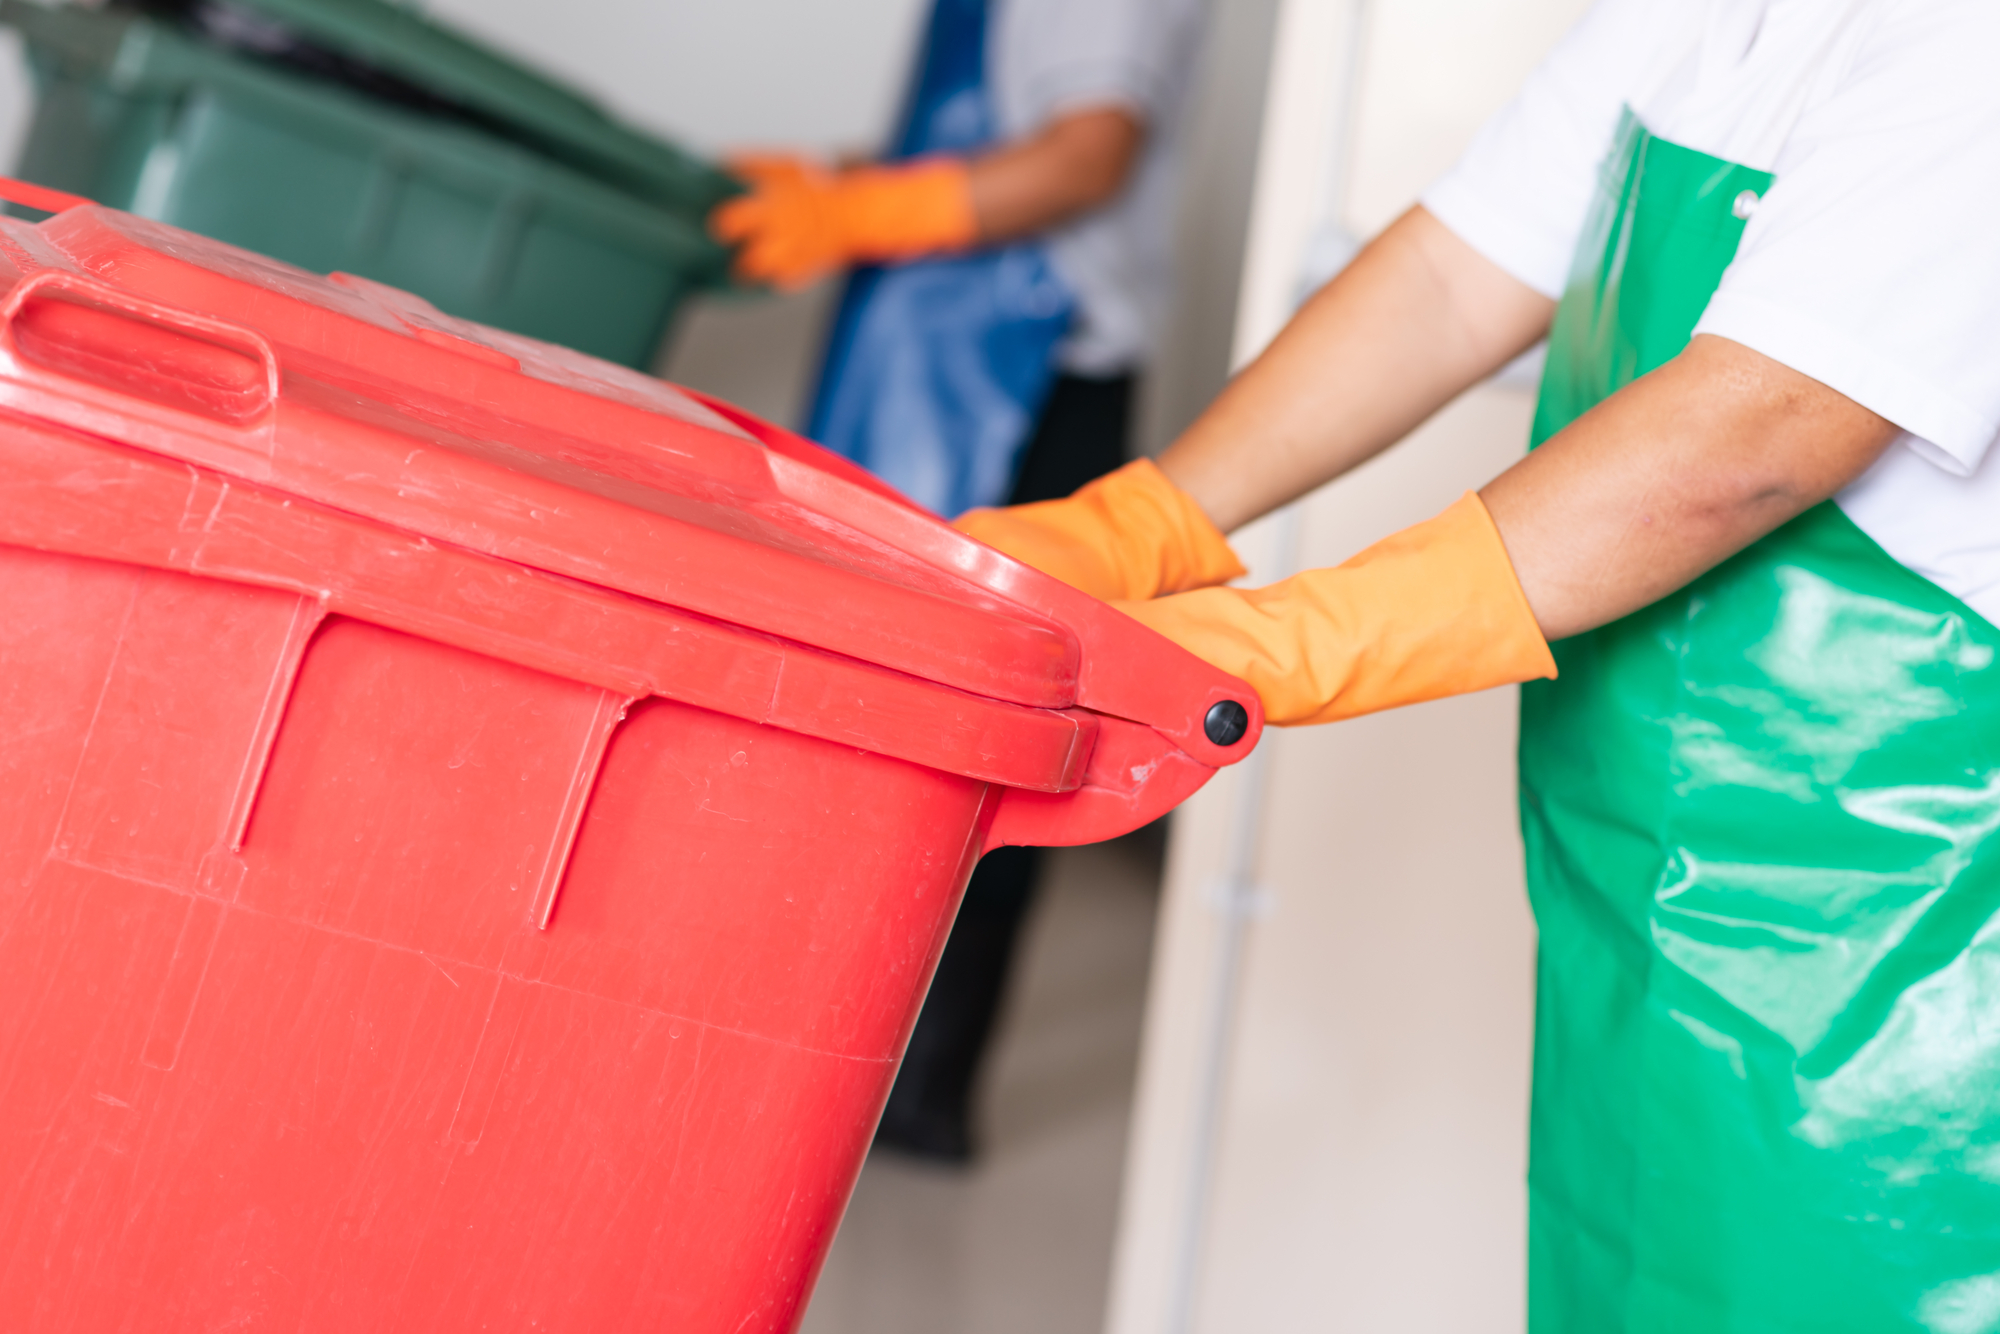 A Person Wearing Gloves and Holding a Red Bin